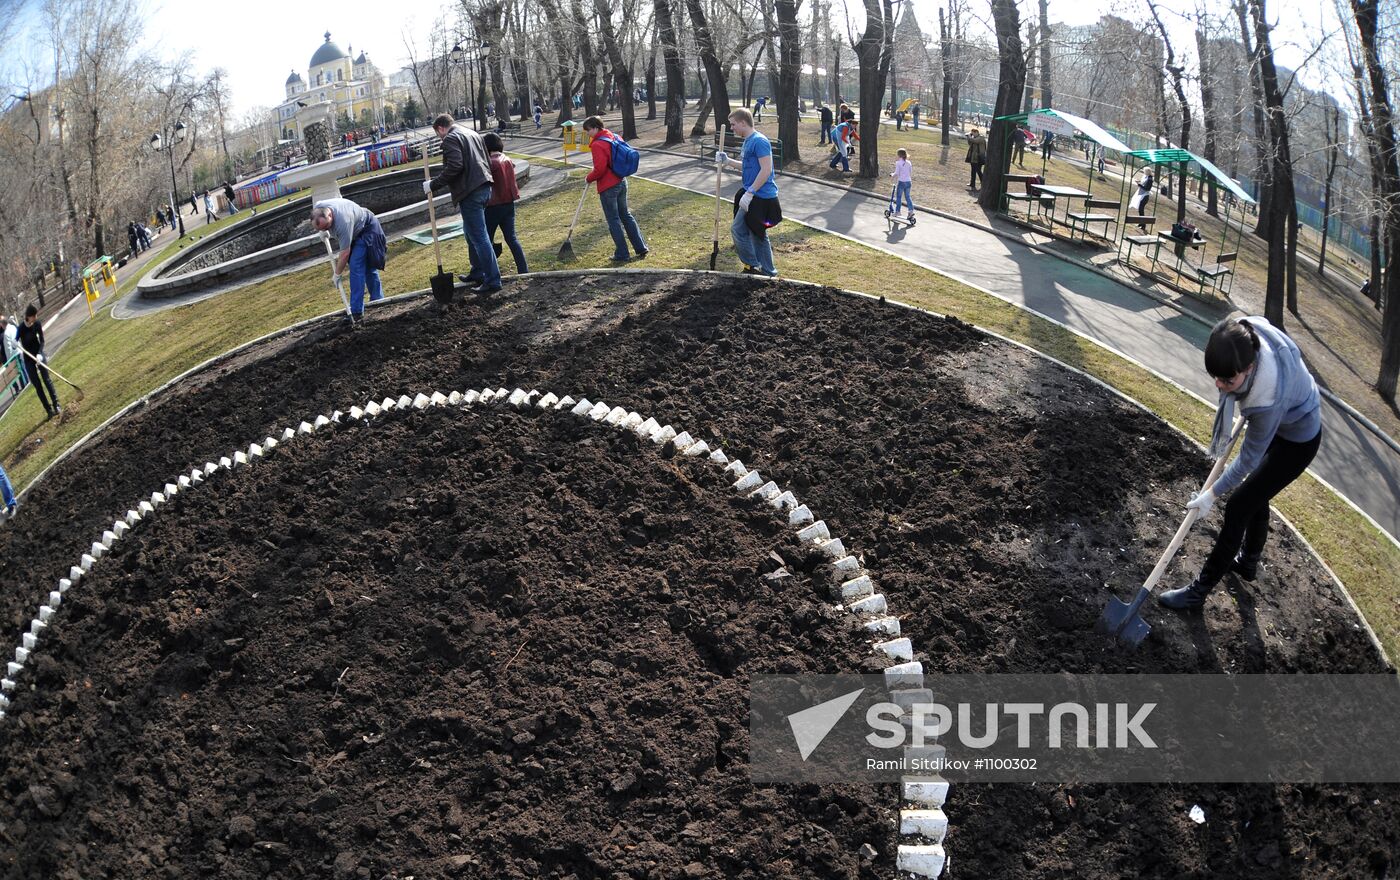 Moscow clean-up day